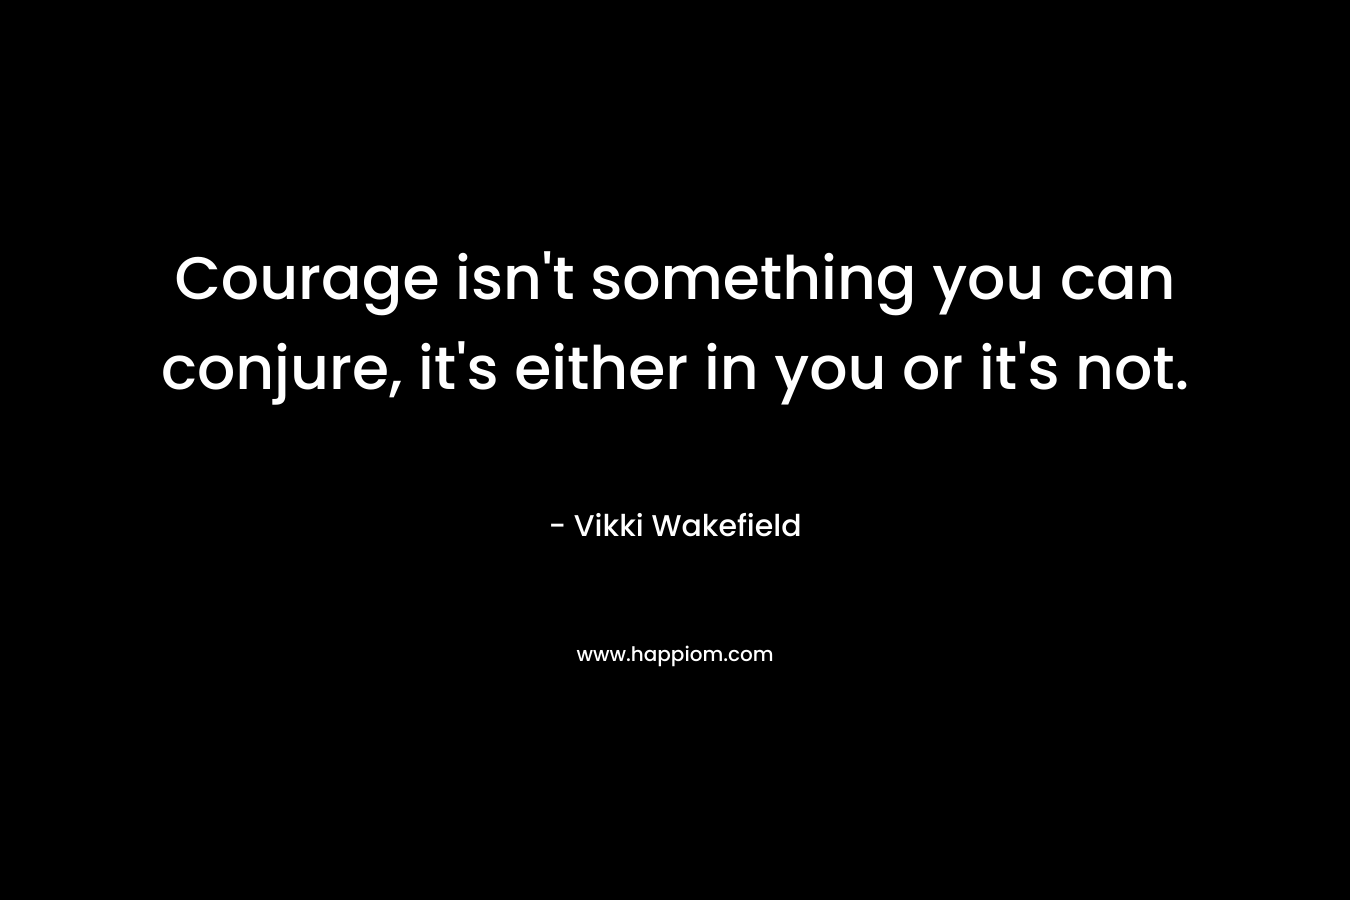 Courage isn't something you can conjure, it's either in you or it's not.